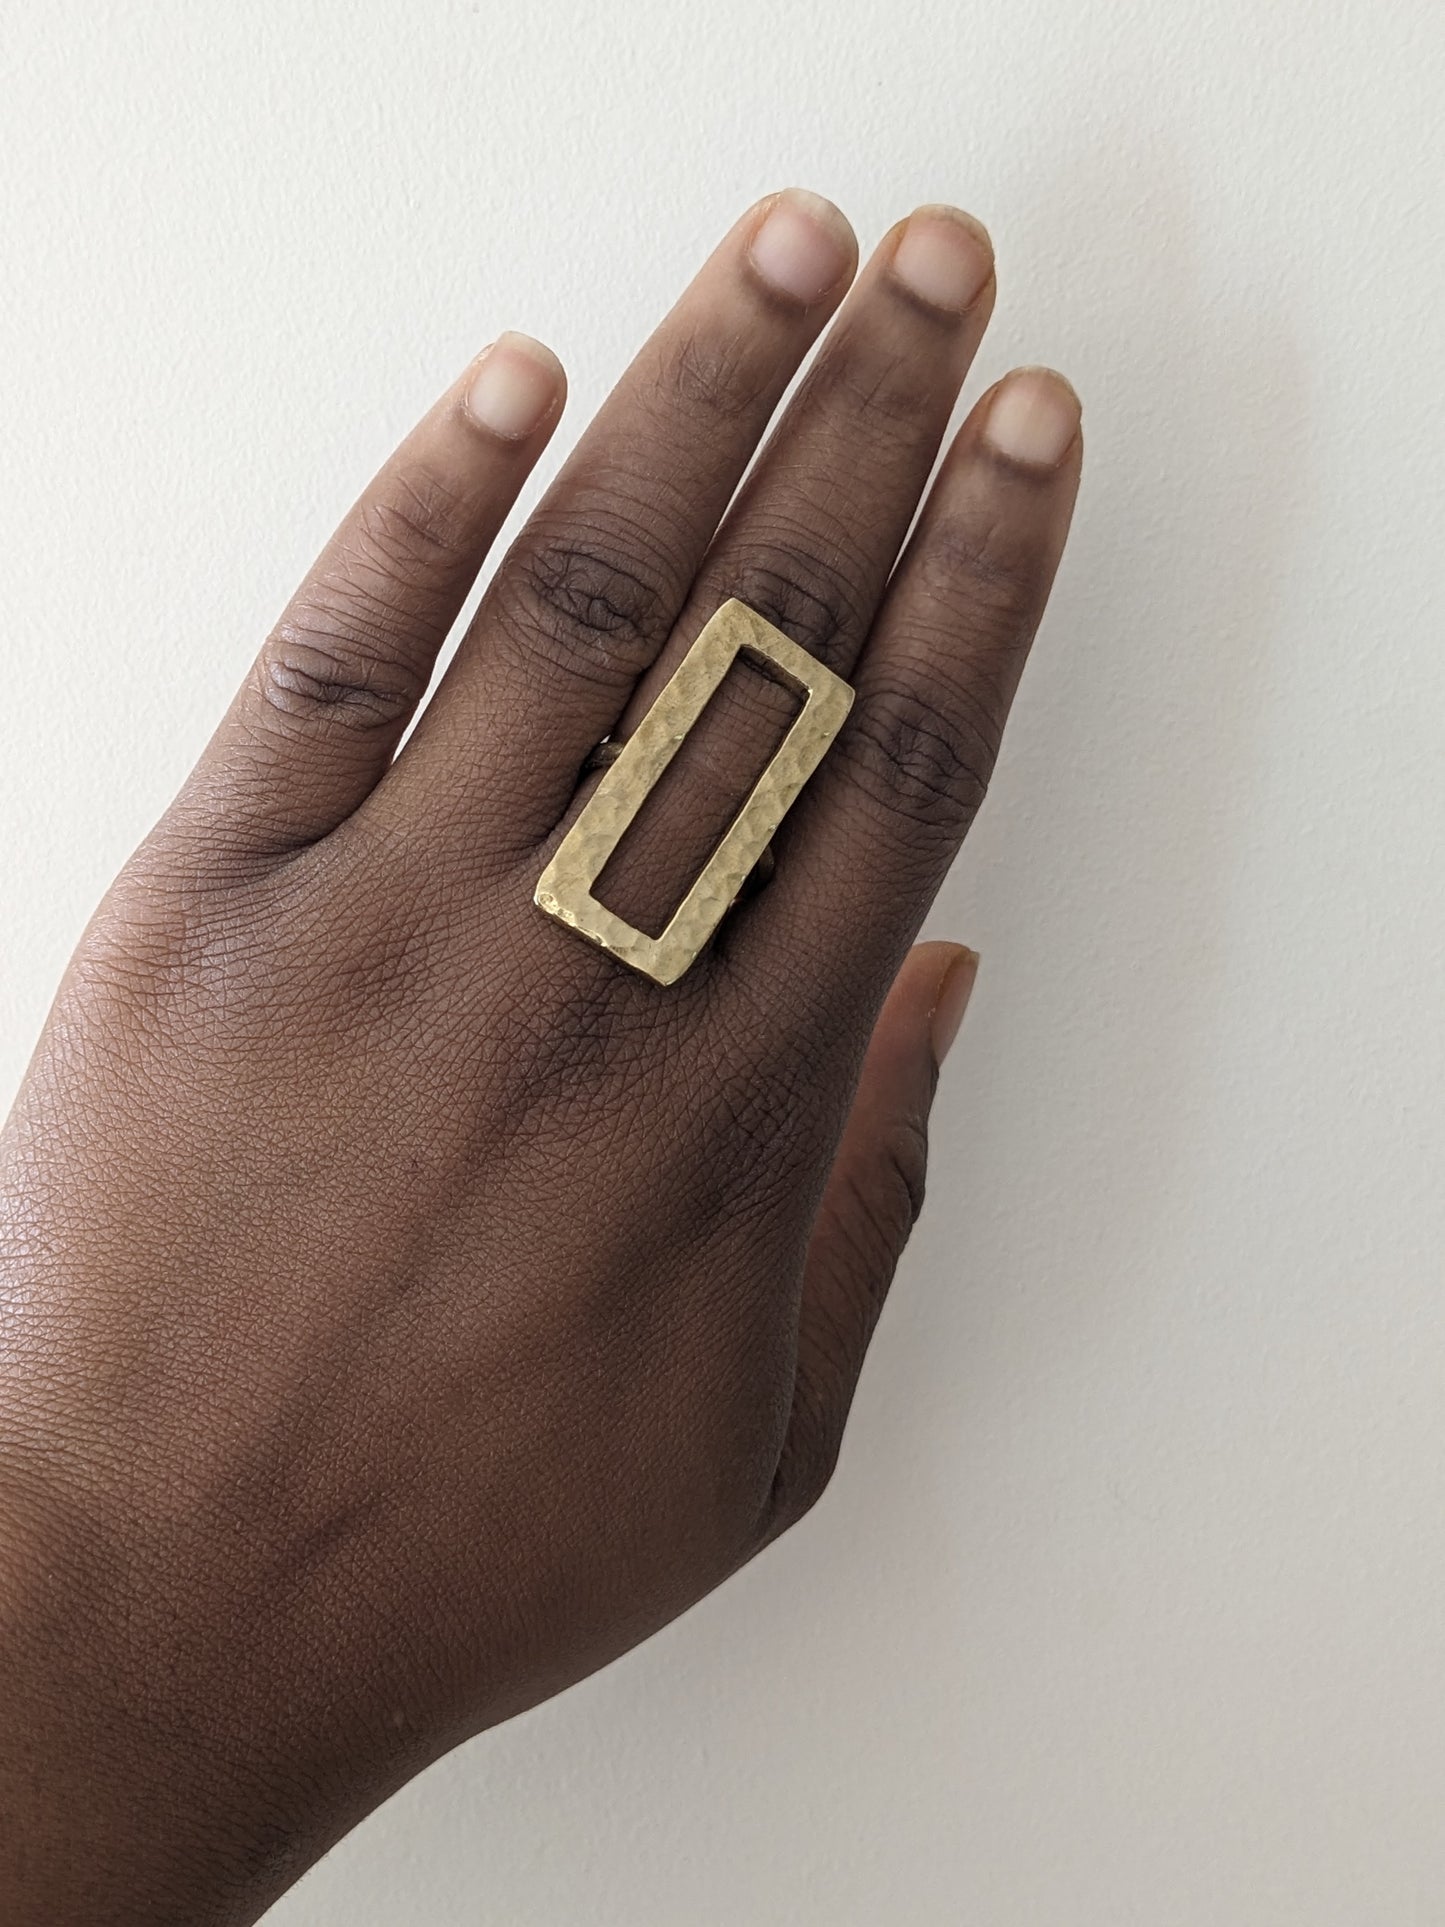 statement rectangle gold ring